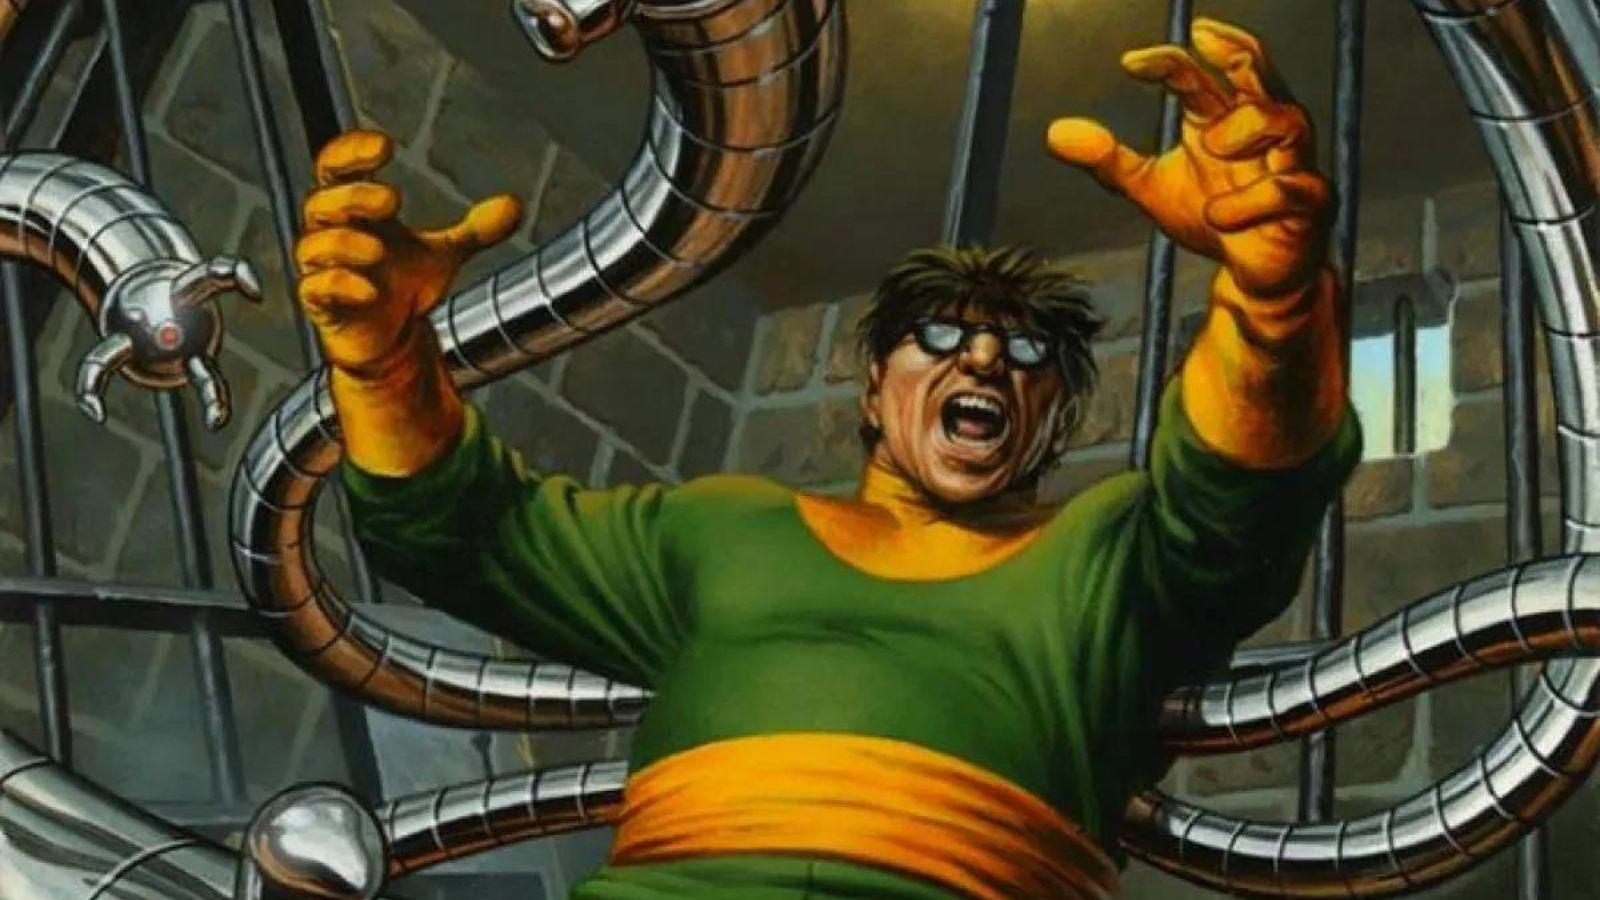 Doctor Octopus Bamboozles Our Opponents! - Marvel SNAP 